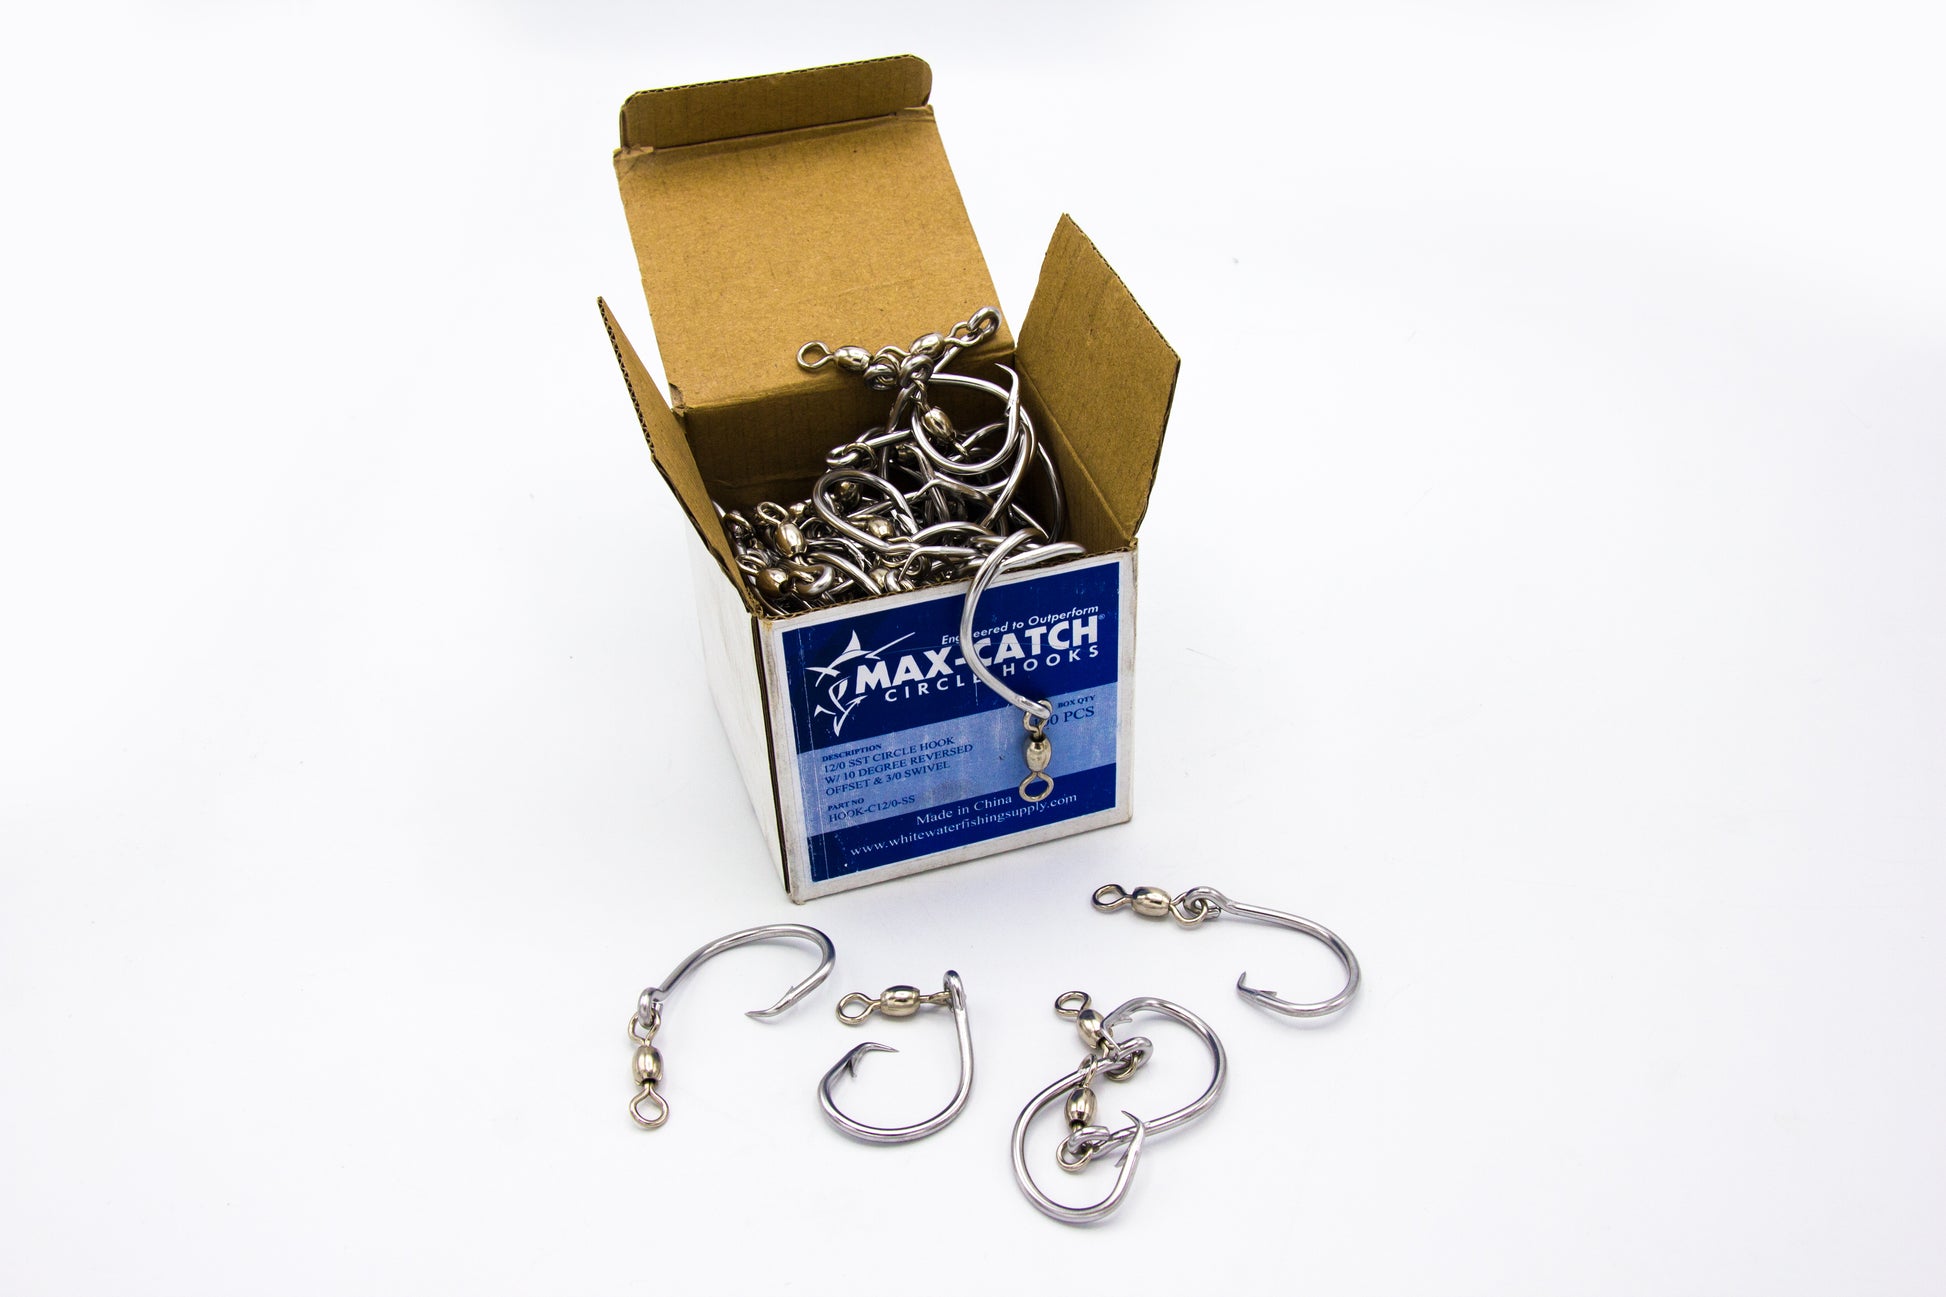 Max-Catch 12/0 Stainless Steel Circle Hooks, 12 0 Circle Hooks